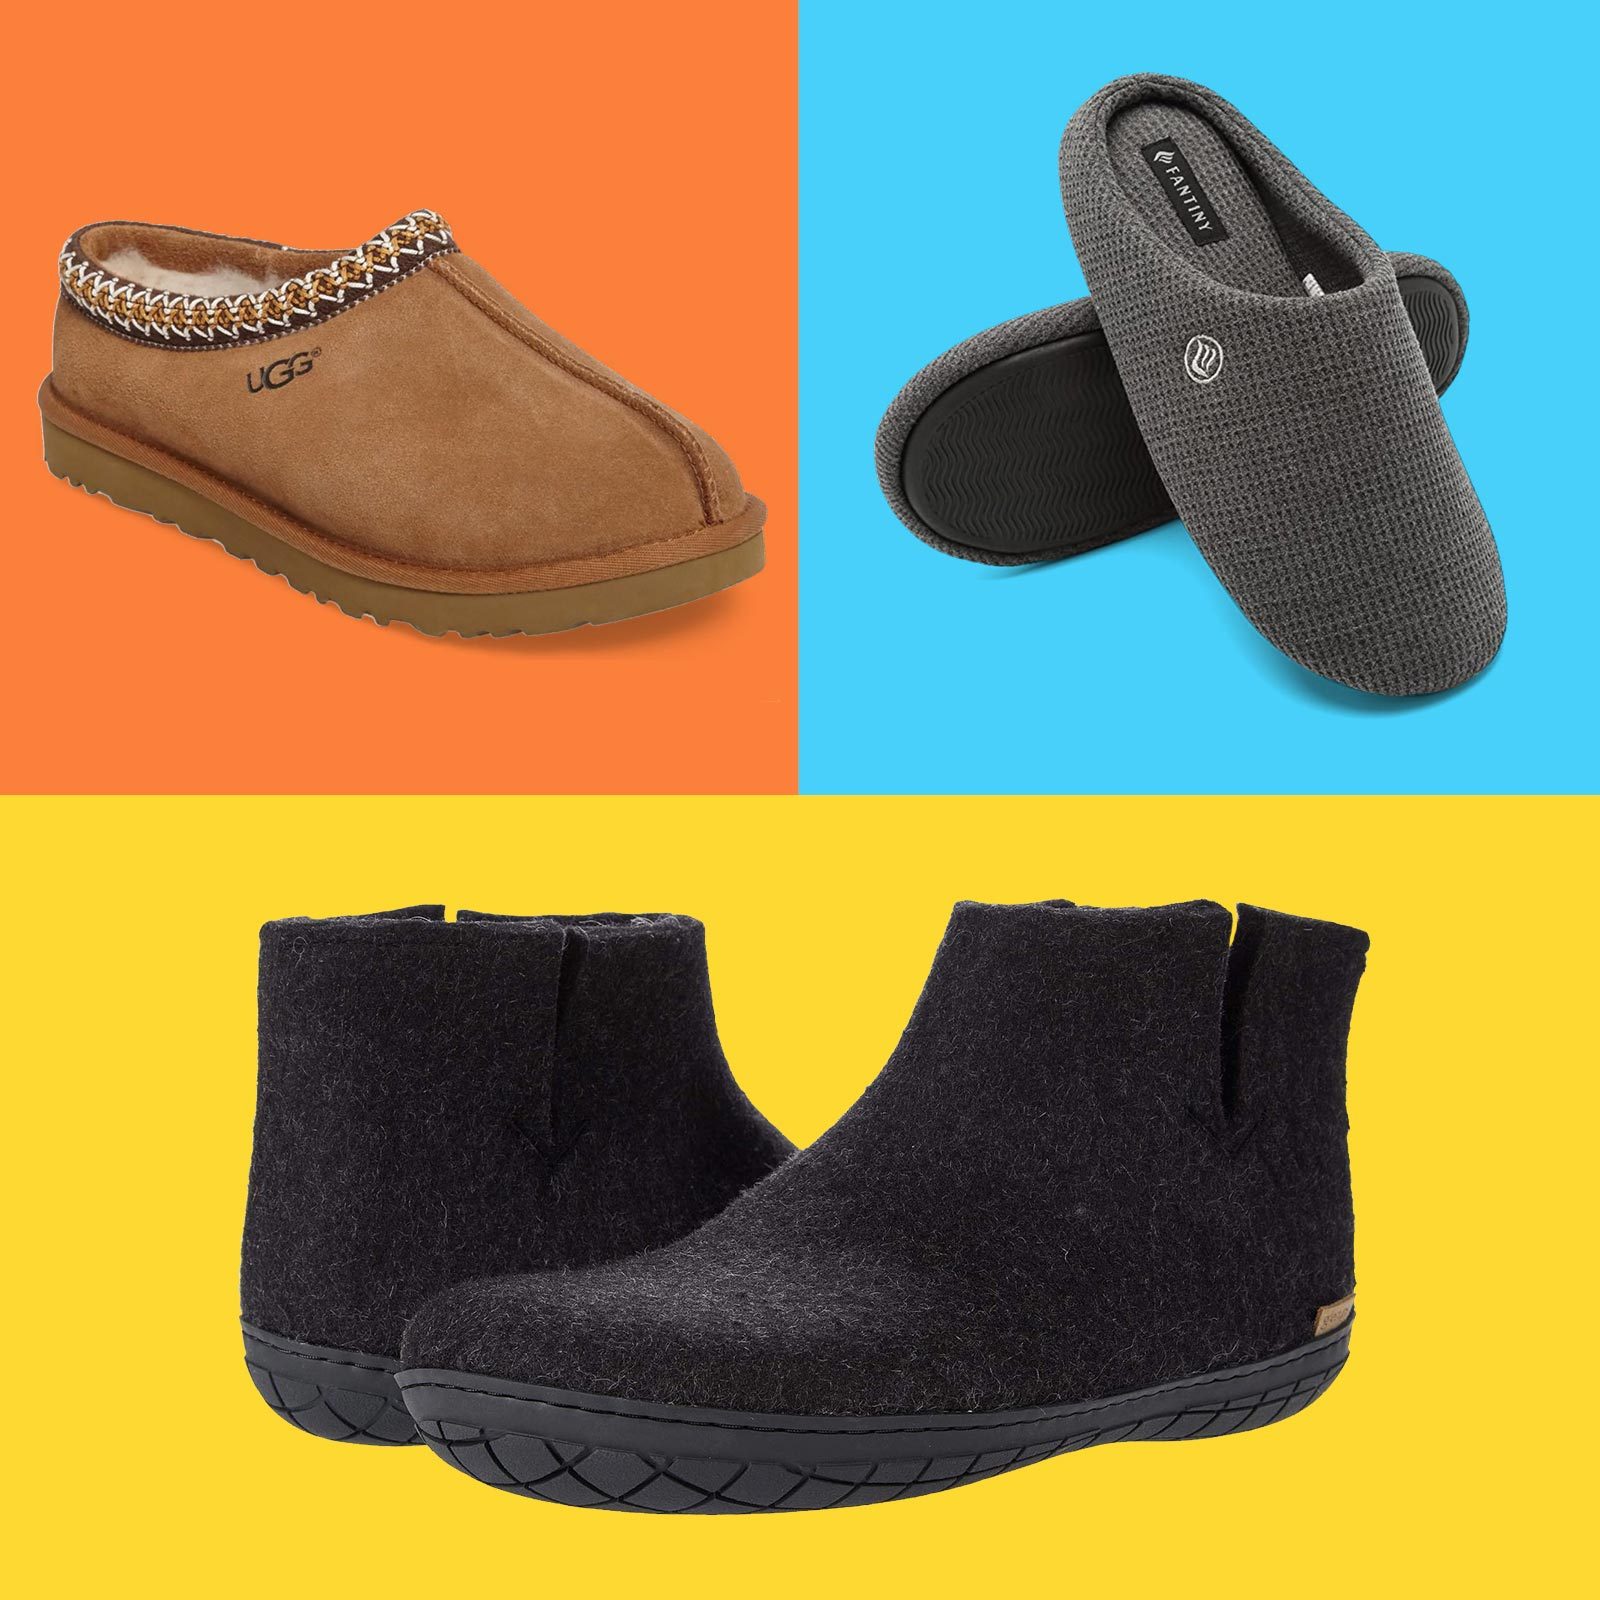 Best Men's Slippers 2023 | Comfy Men's Slippers for the House and More